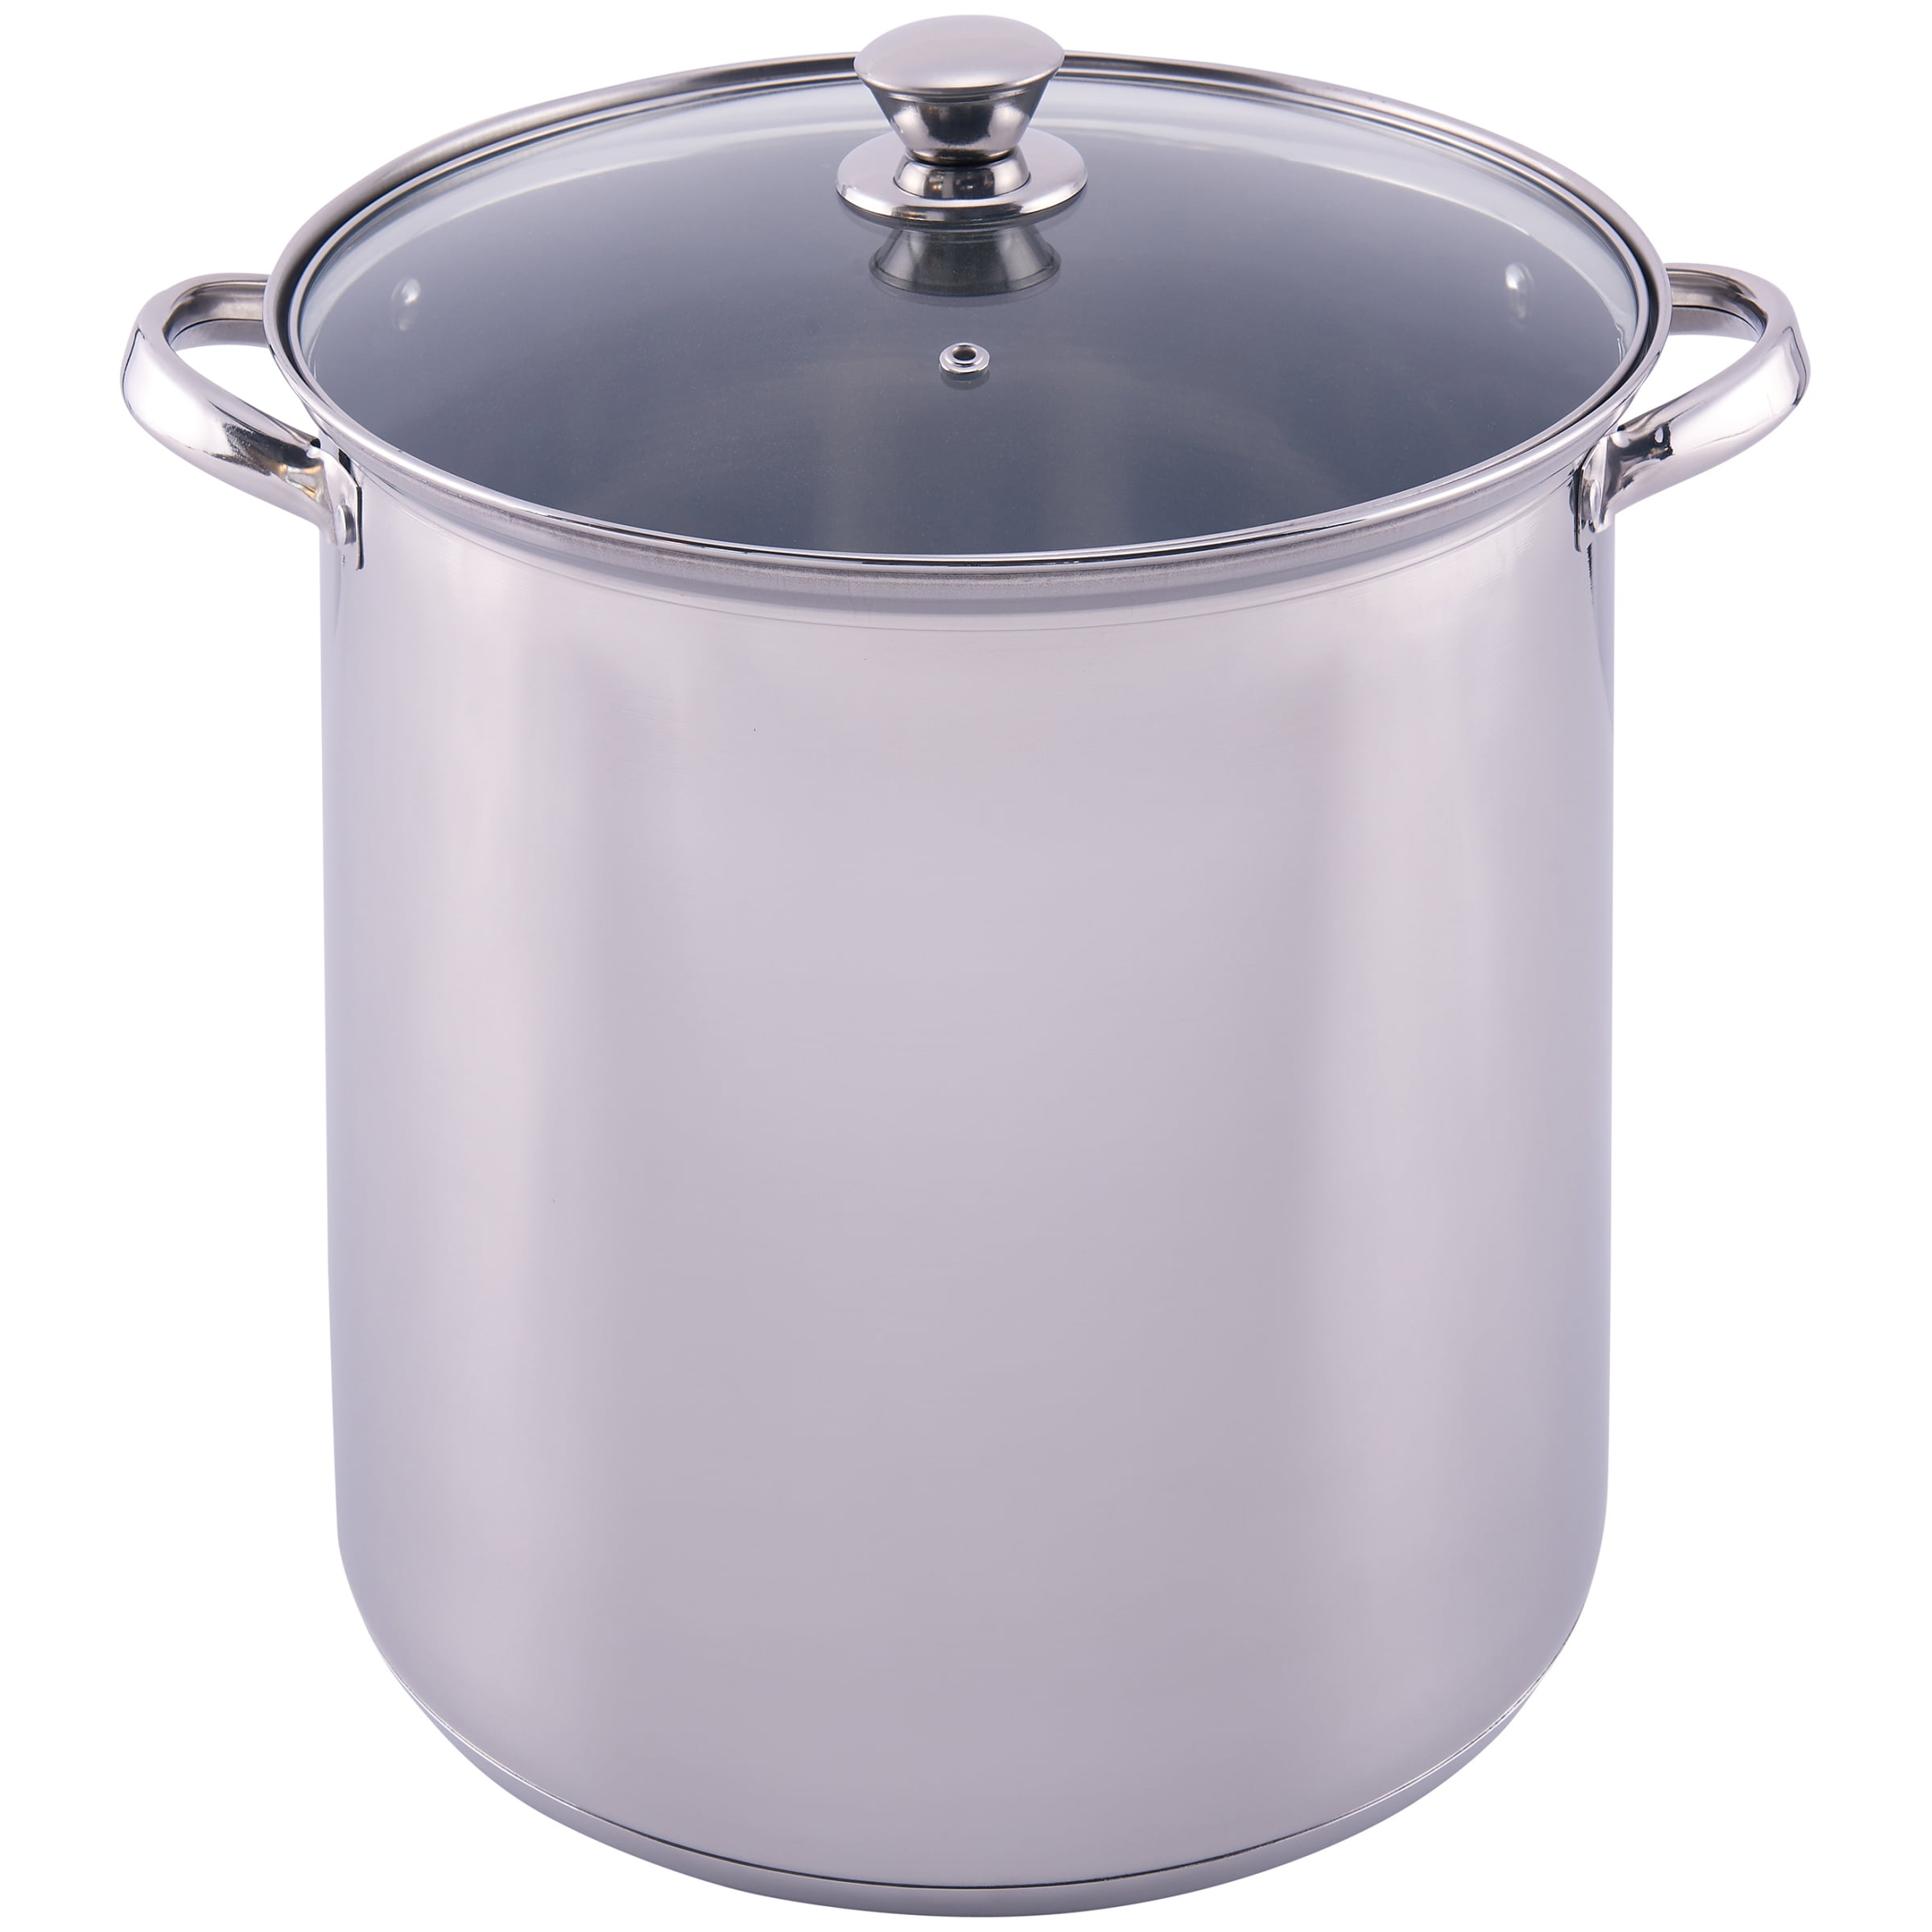 All-Clad Stainless Steel 16-Qt. Stockpot with Lid + Reviews